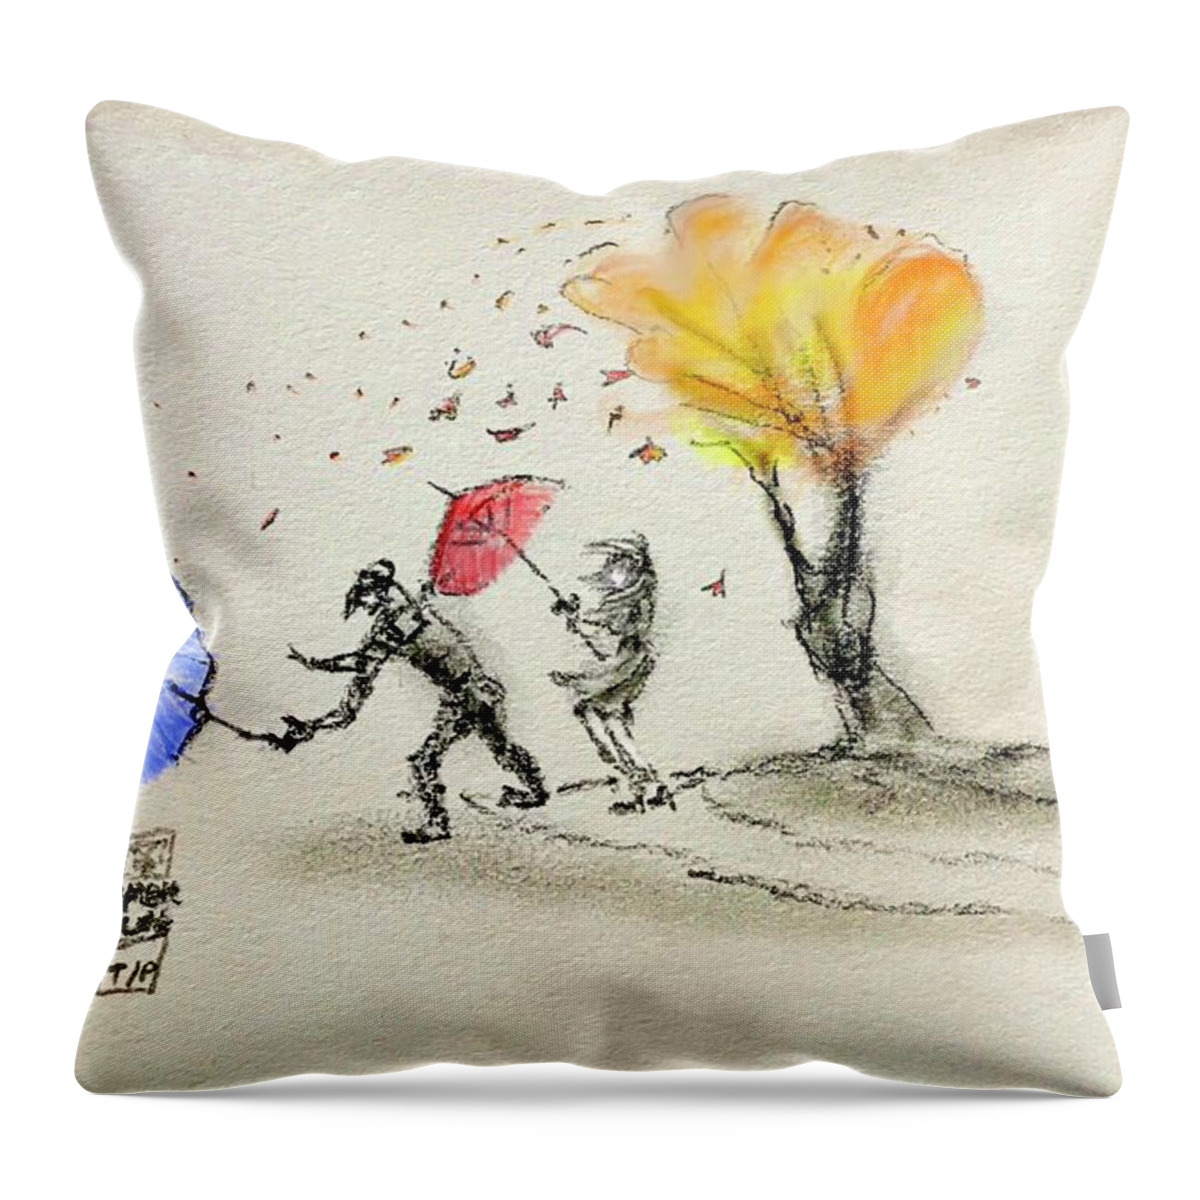 Sketch Throw Pillow featuring the photograph Couple in Leaf Rain by Micky Roberts